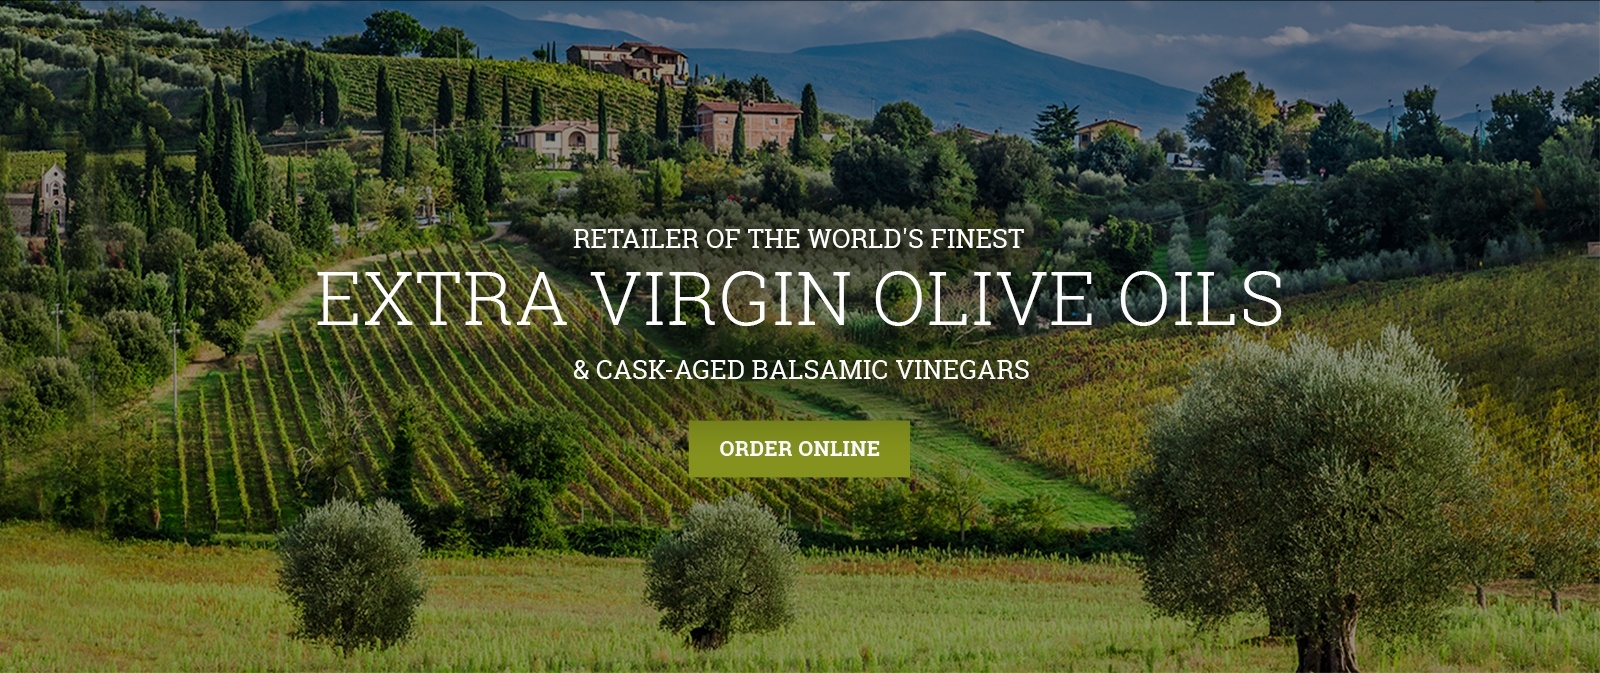 Retailer of the world's finest and freshest extra virgin olive oils | Artisan Olive Oil and Vinegar Store